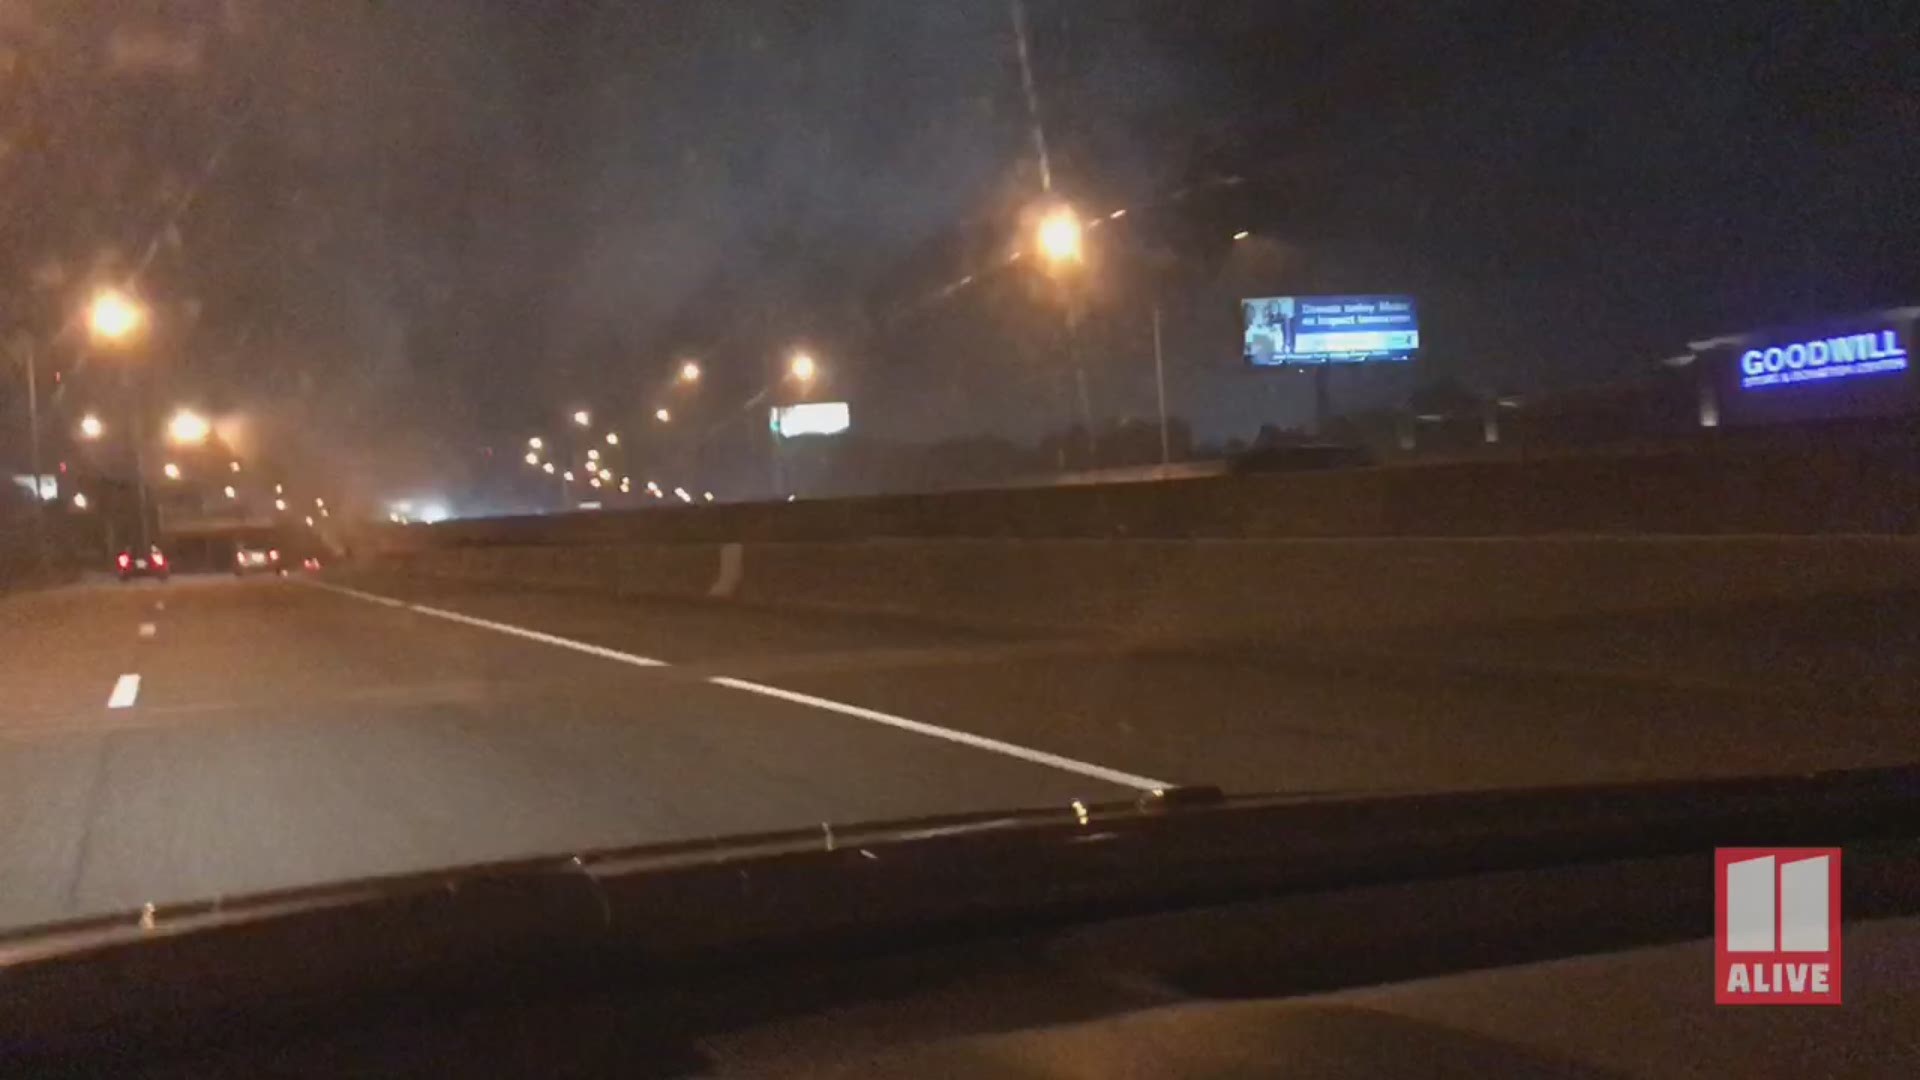 Video shows a fire burning under I-85 in the midtown area on July 19, 2019